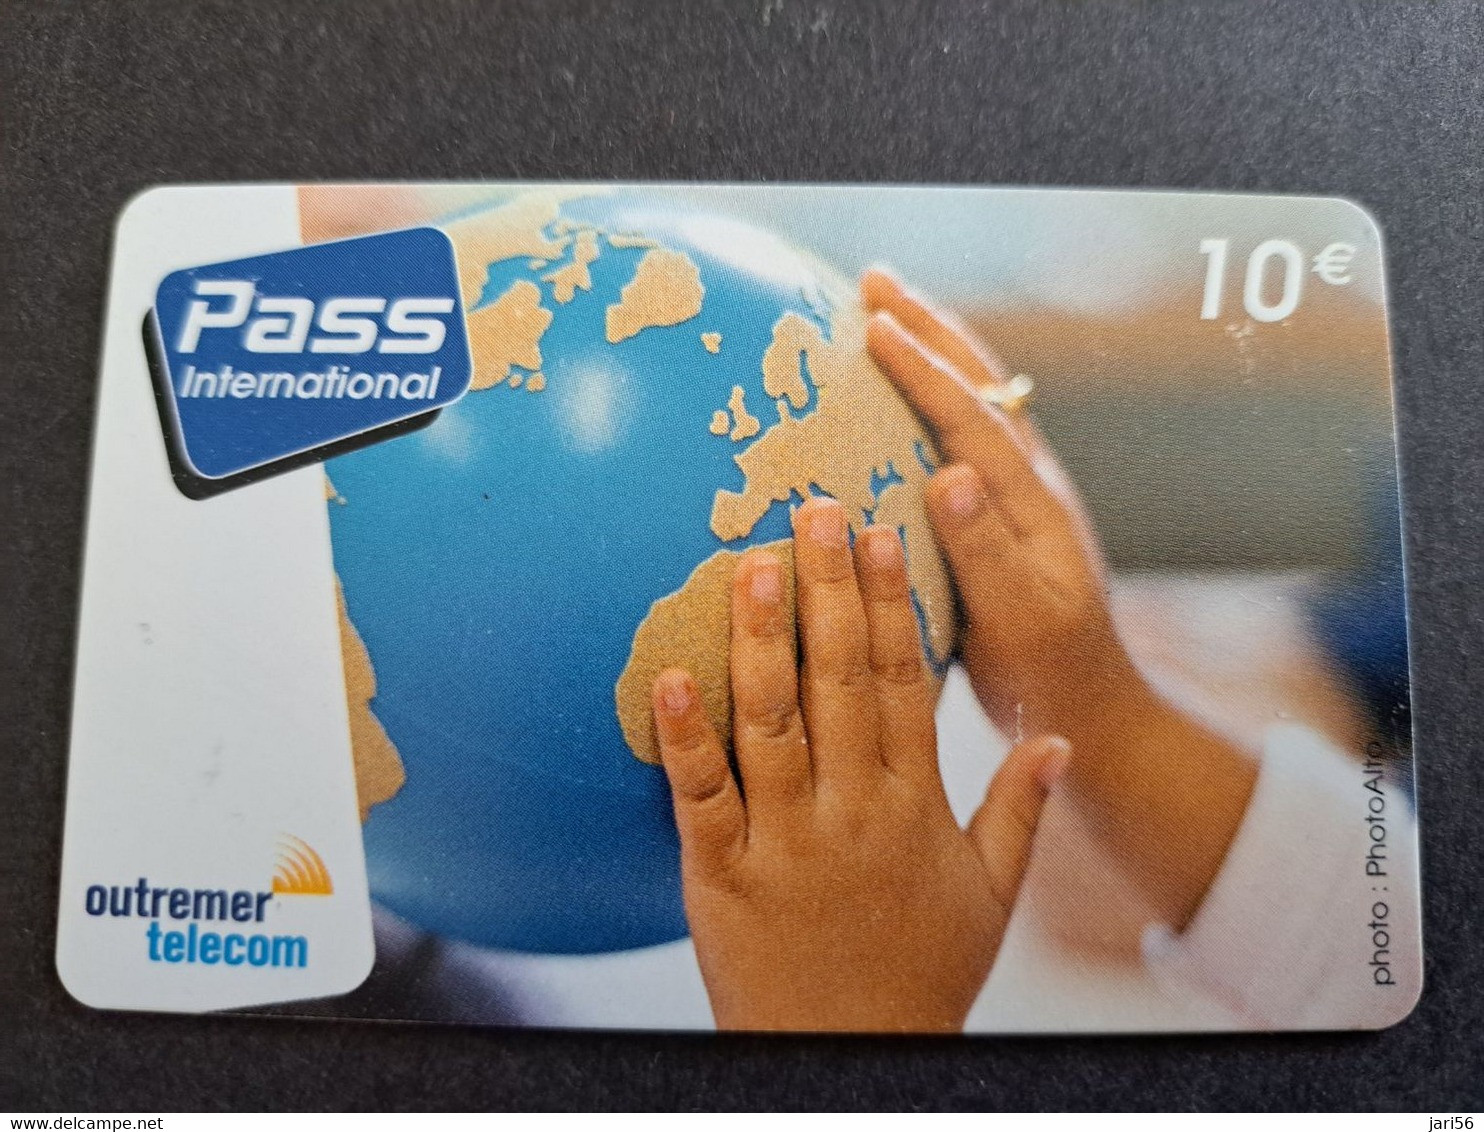 ST MARTIN  OUTREMER TELECOM /PASS INTERNATIONAL  10 €  / 2 HANDS ON EARTH SPHERE/GLOBE  (5000X)       ** 10510 ** - Antilles (French)